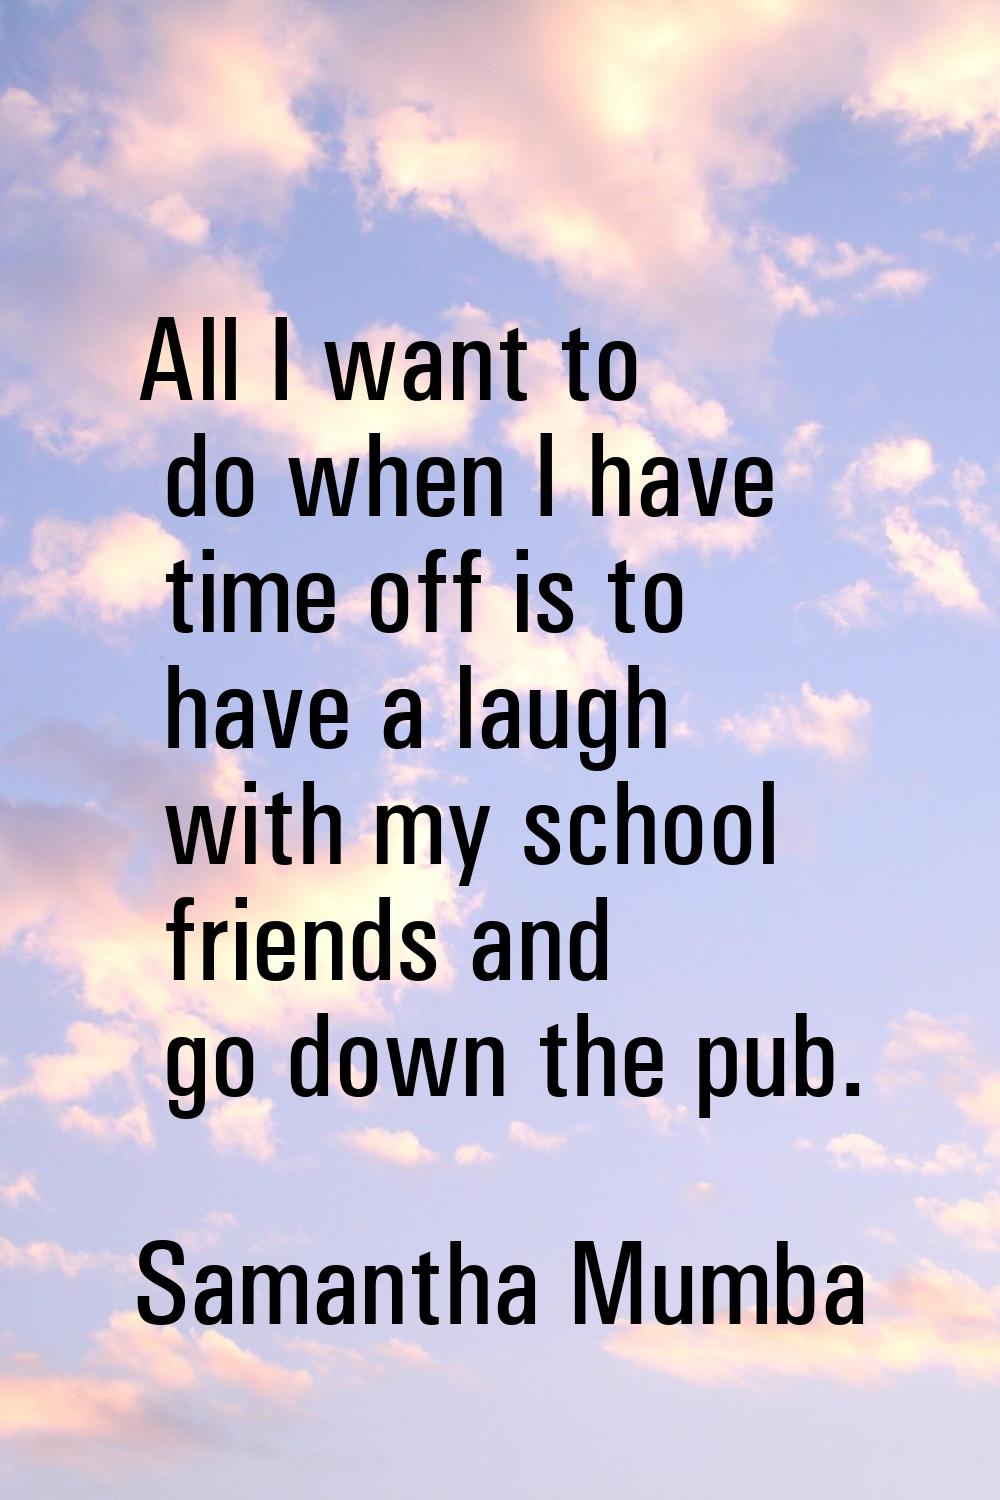 All I want to do when I have time off is to have a laugh with my school friends and go down the pub